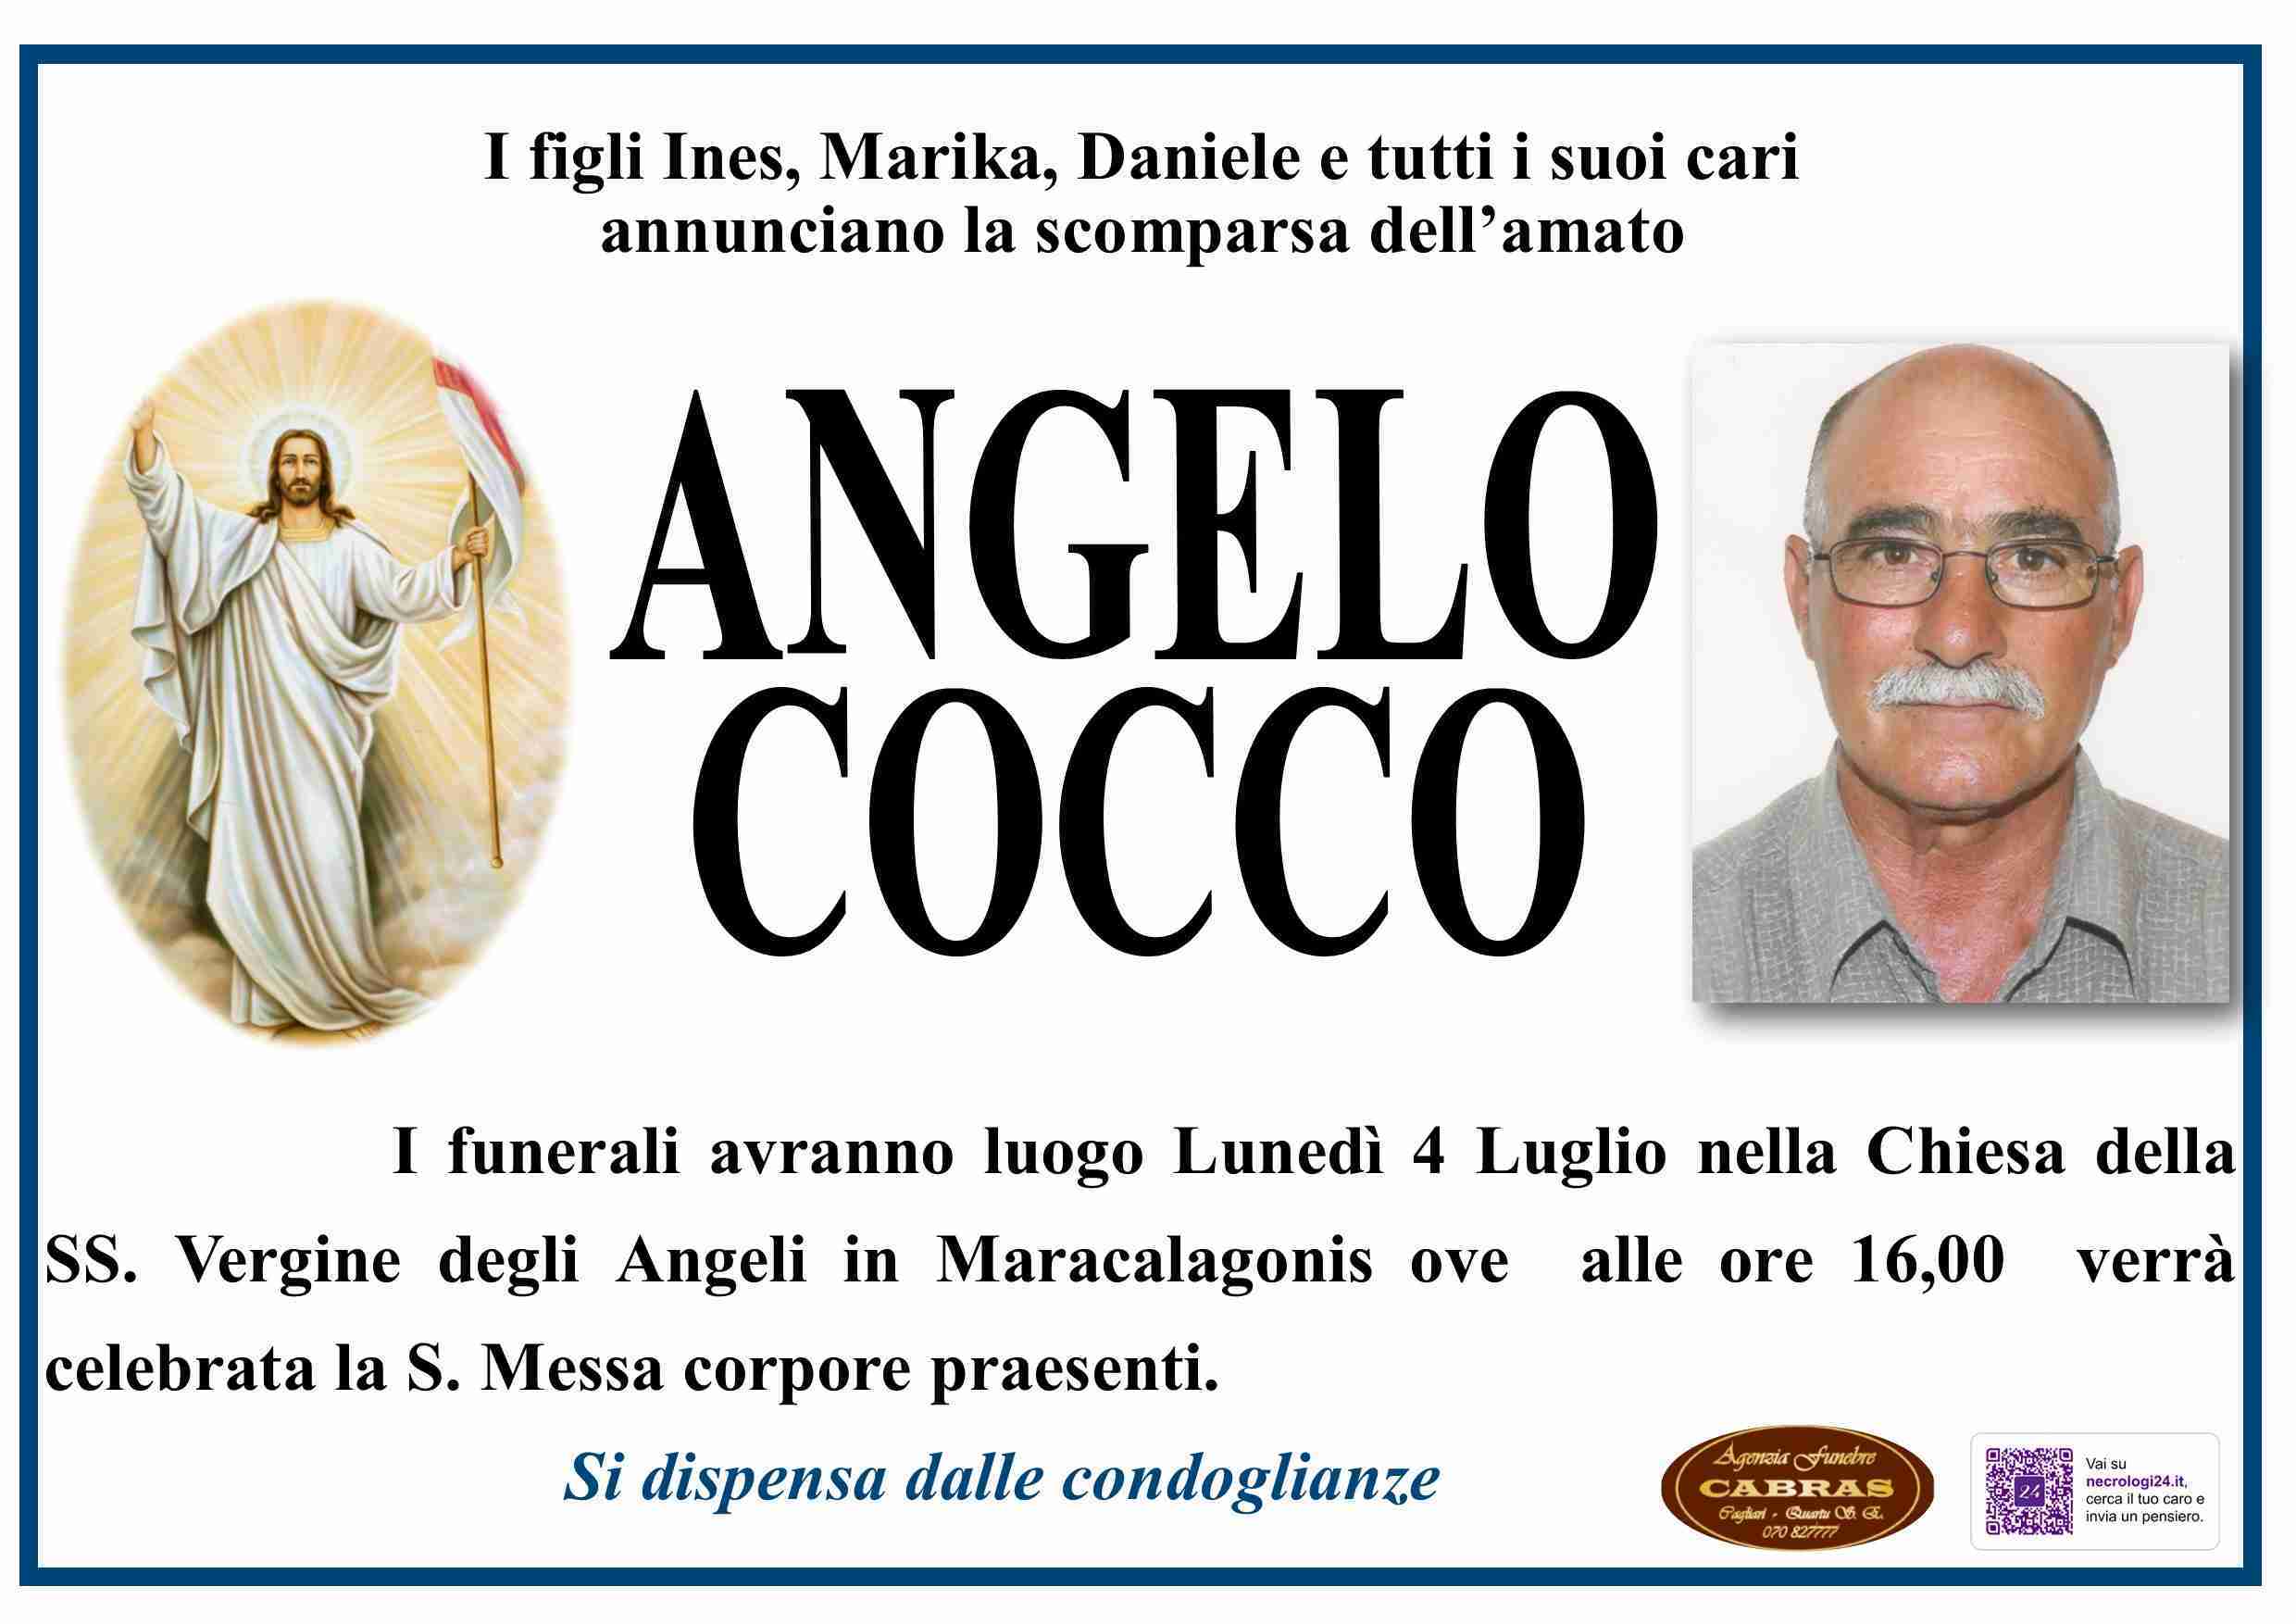 Angelo Cocco